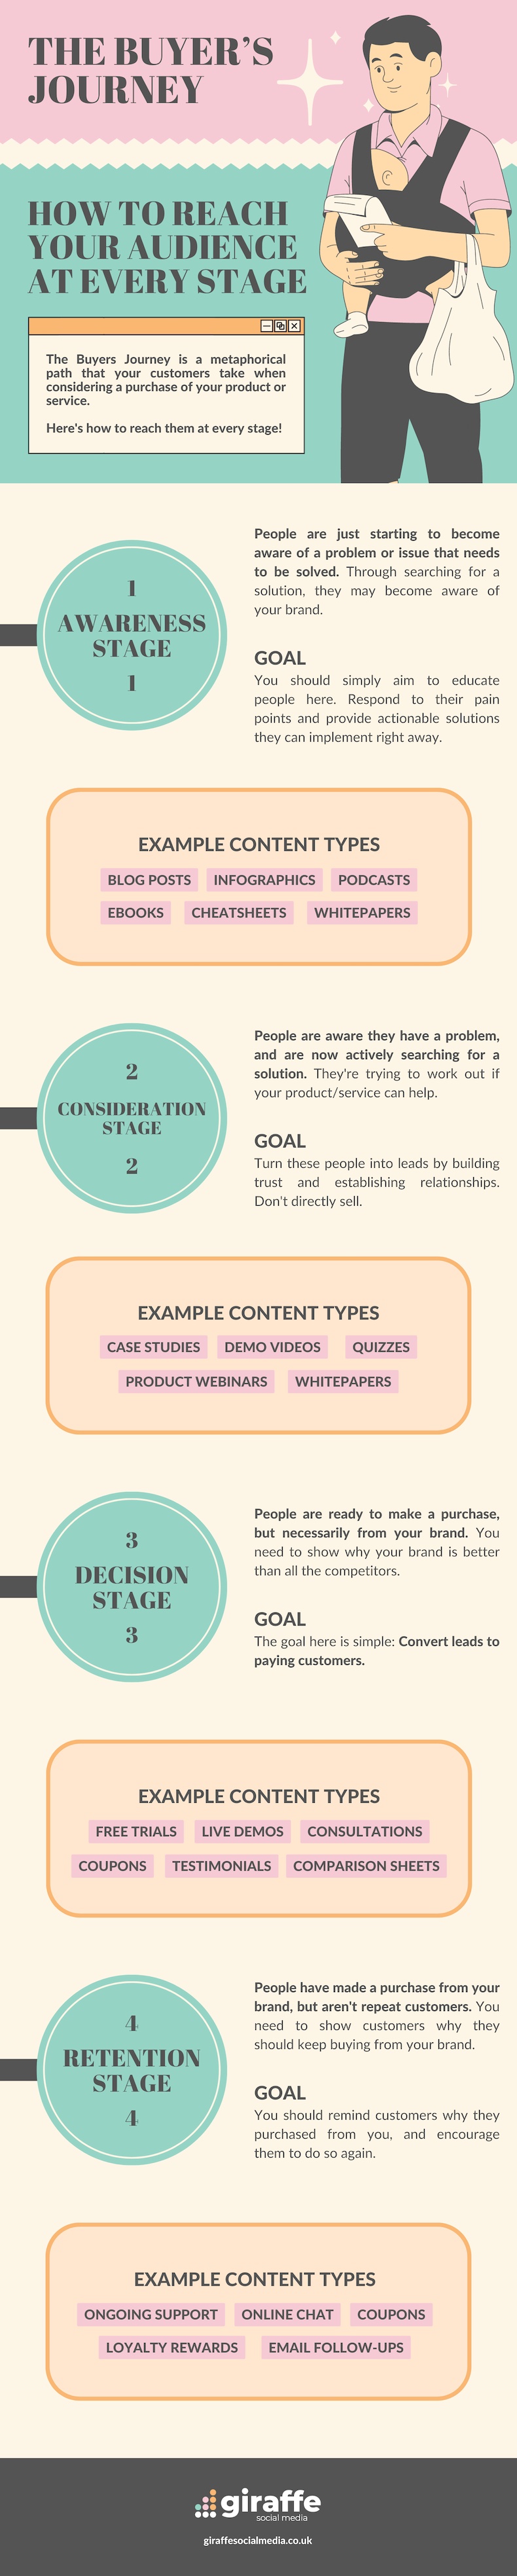 How to reach your audience at every stage of the buyer's journey infographic